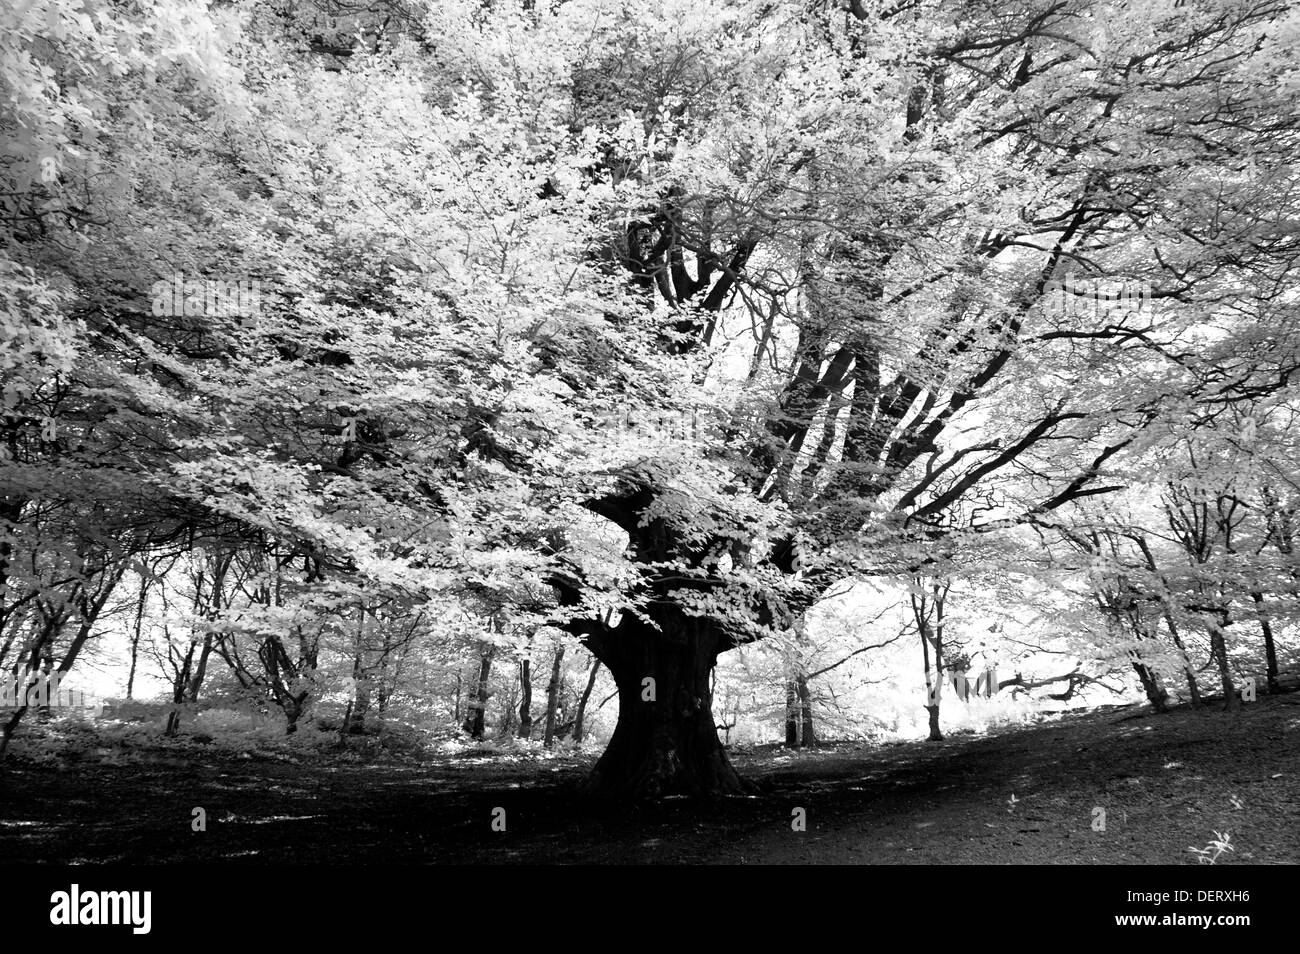 Black & white infrared image on a tree Stock Photo